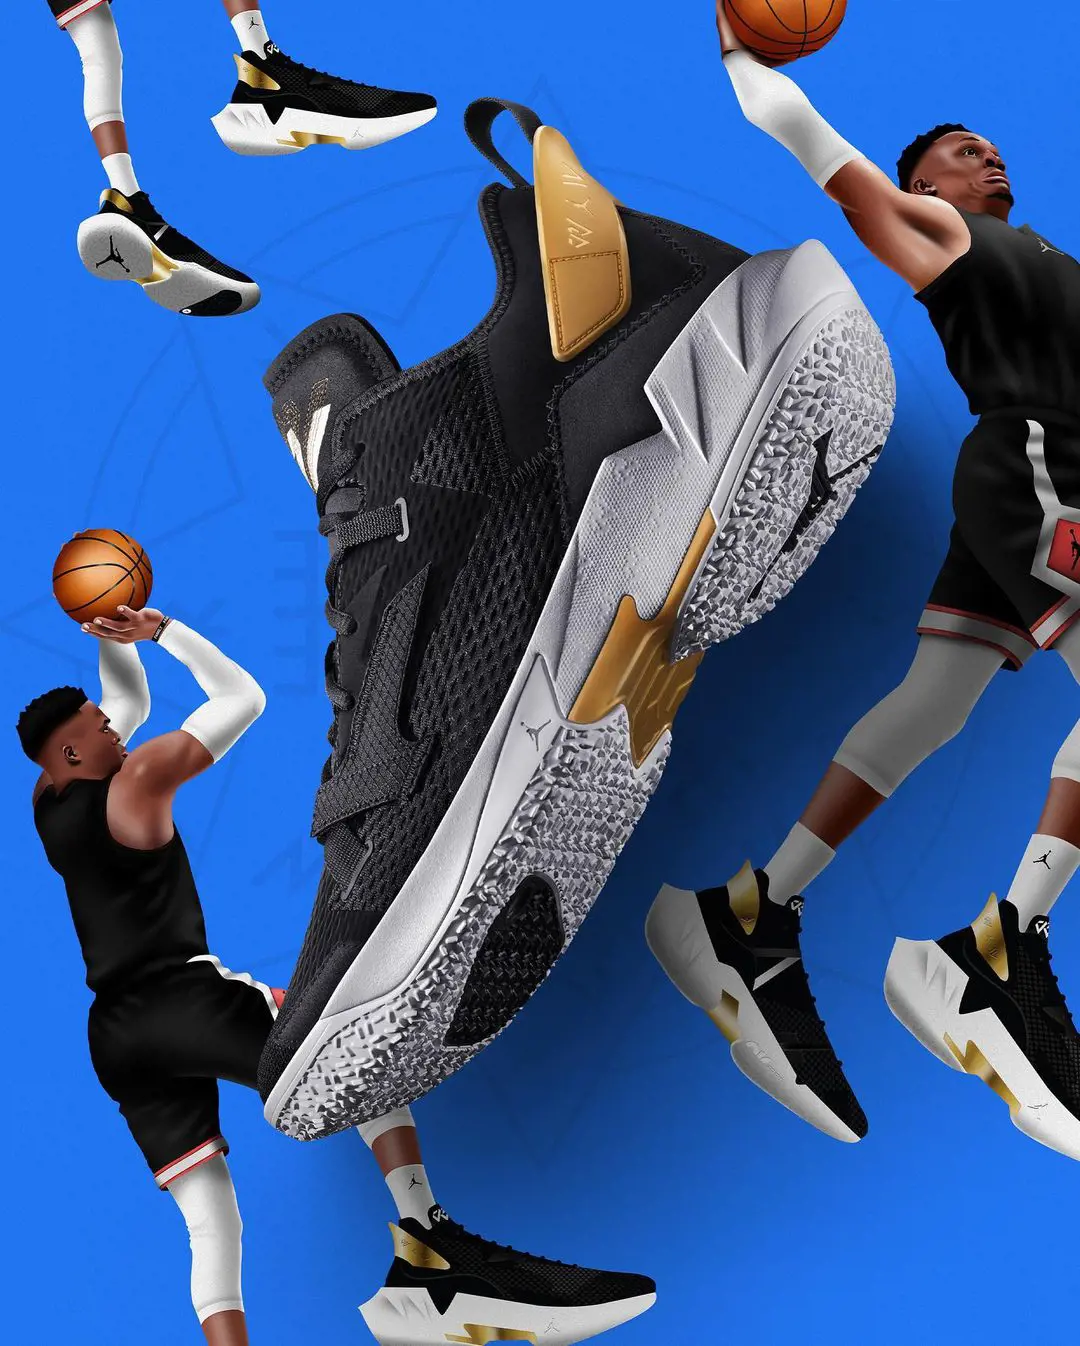 The brand new Jordan shoe is made for Russell Westbrook